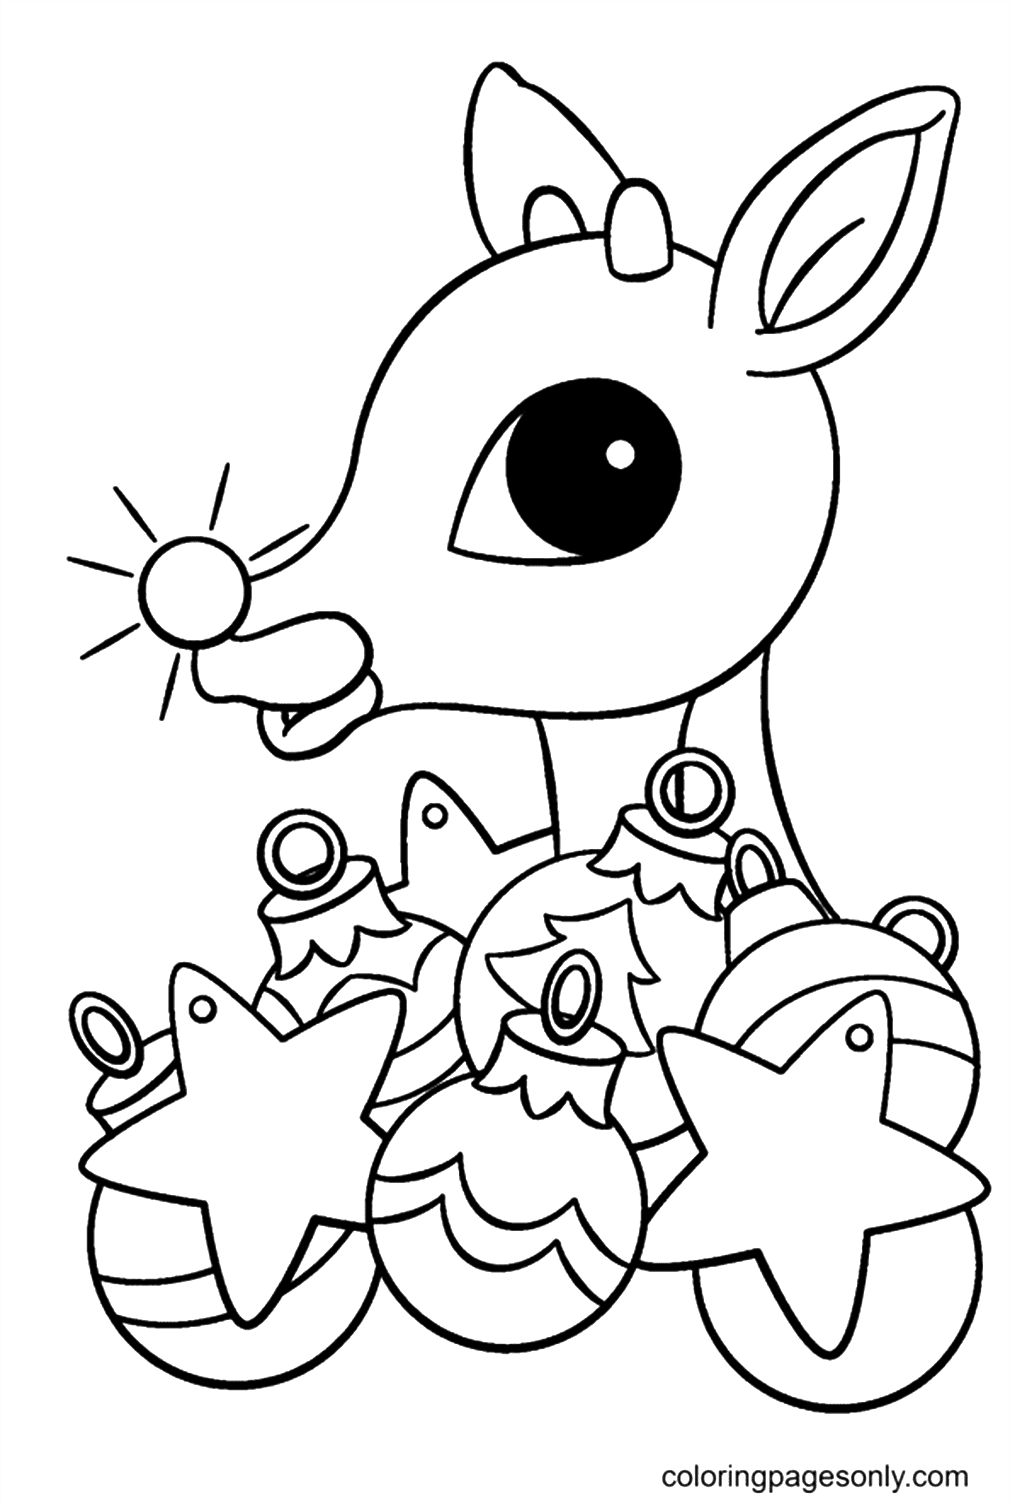 Red Nose Reindeer with Christmas Decorations Coloring Page